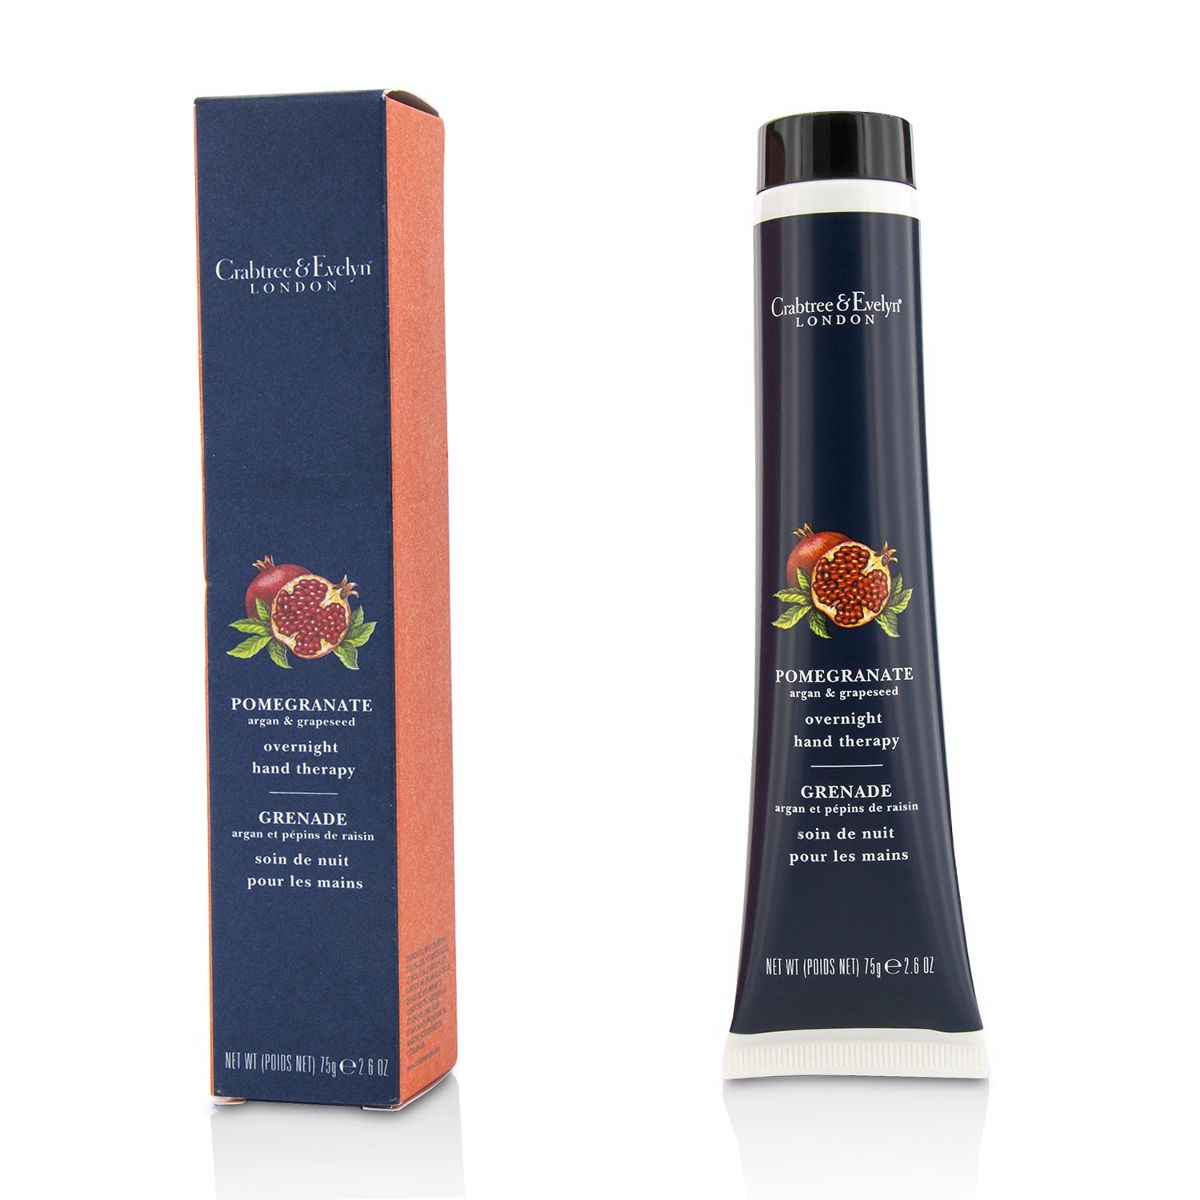 Pomegranate Overnight Hand Therapy Crabtree & Evelyn Image